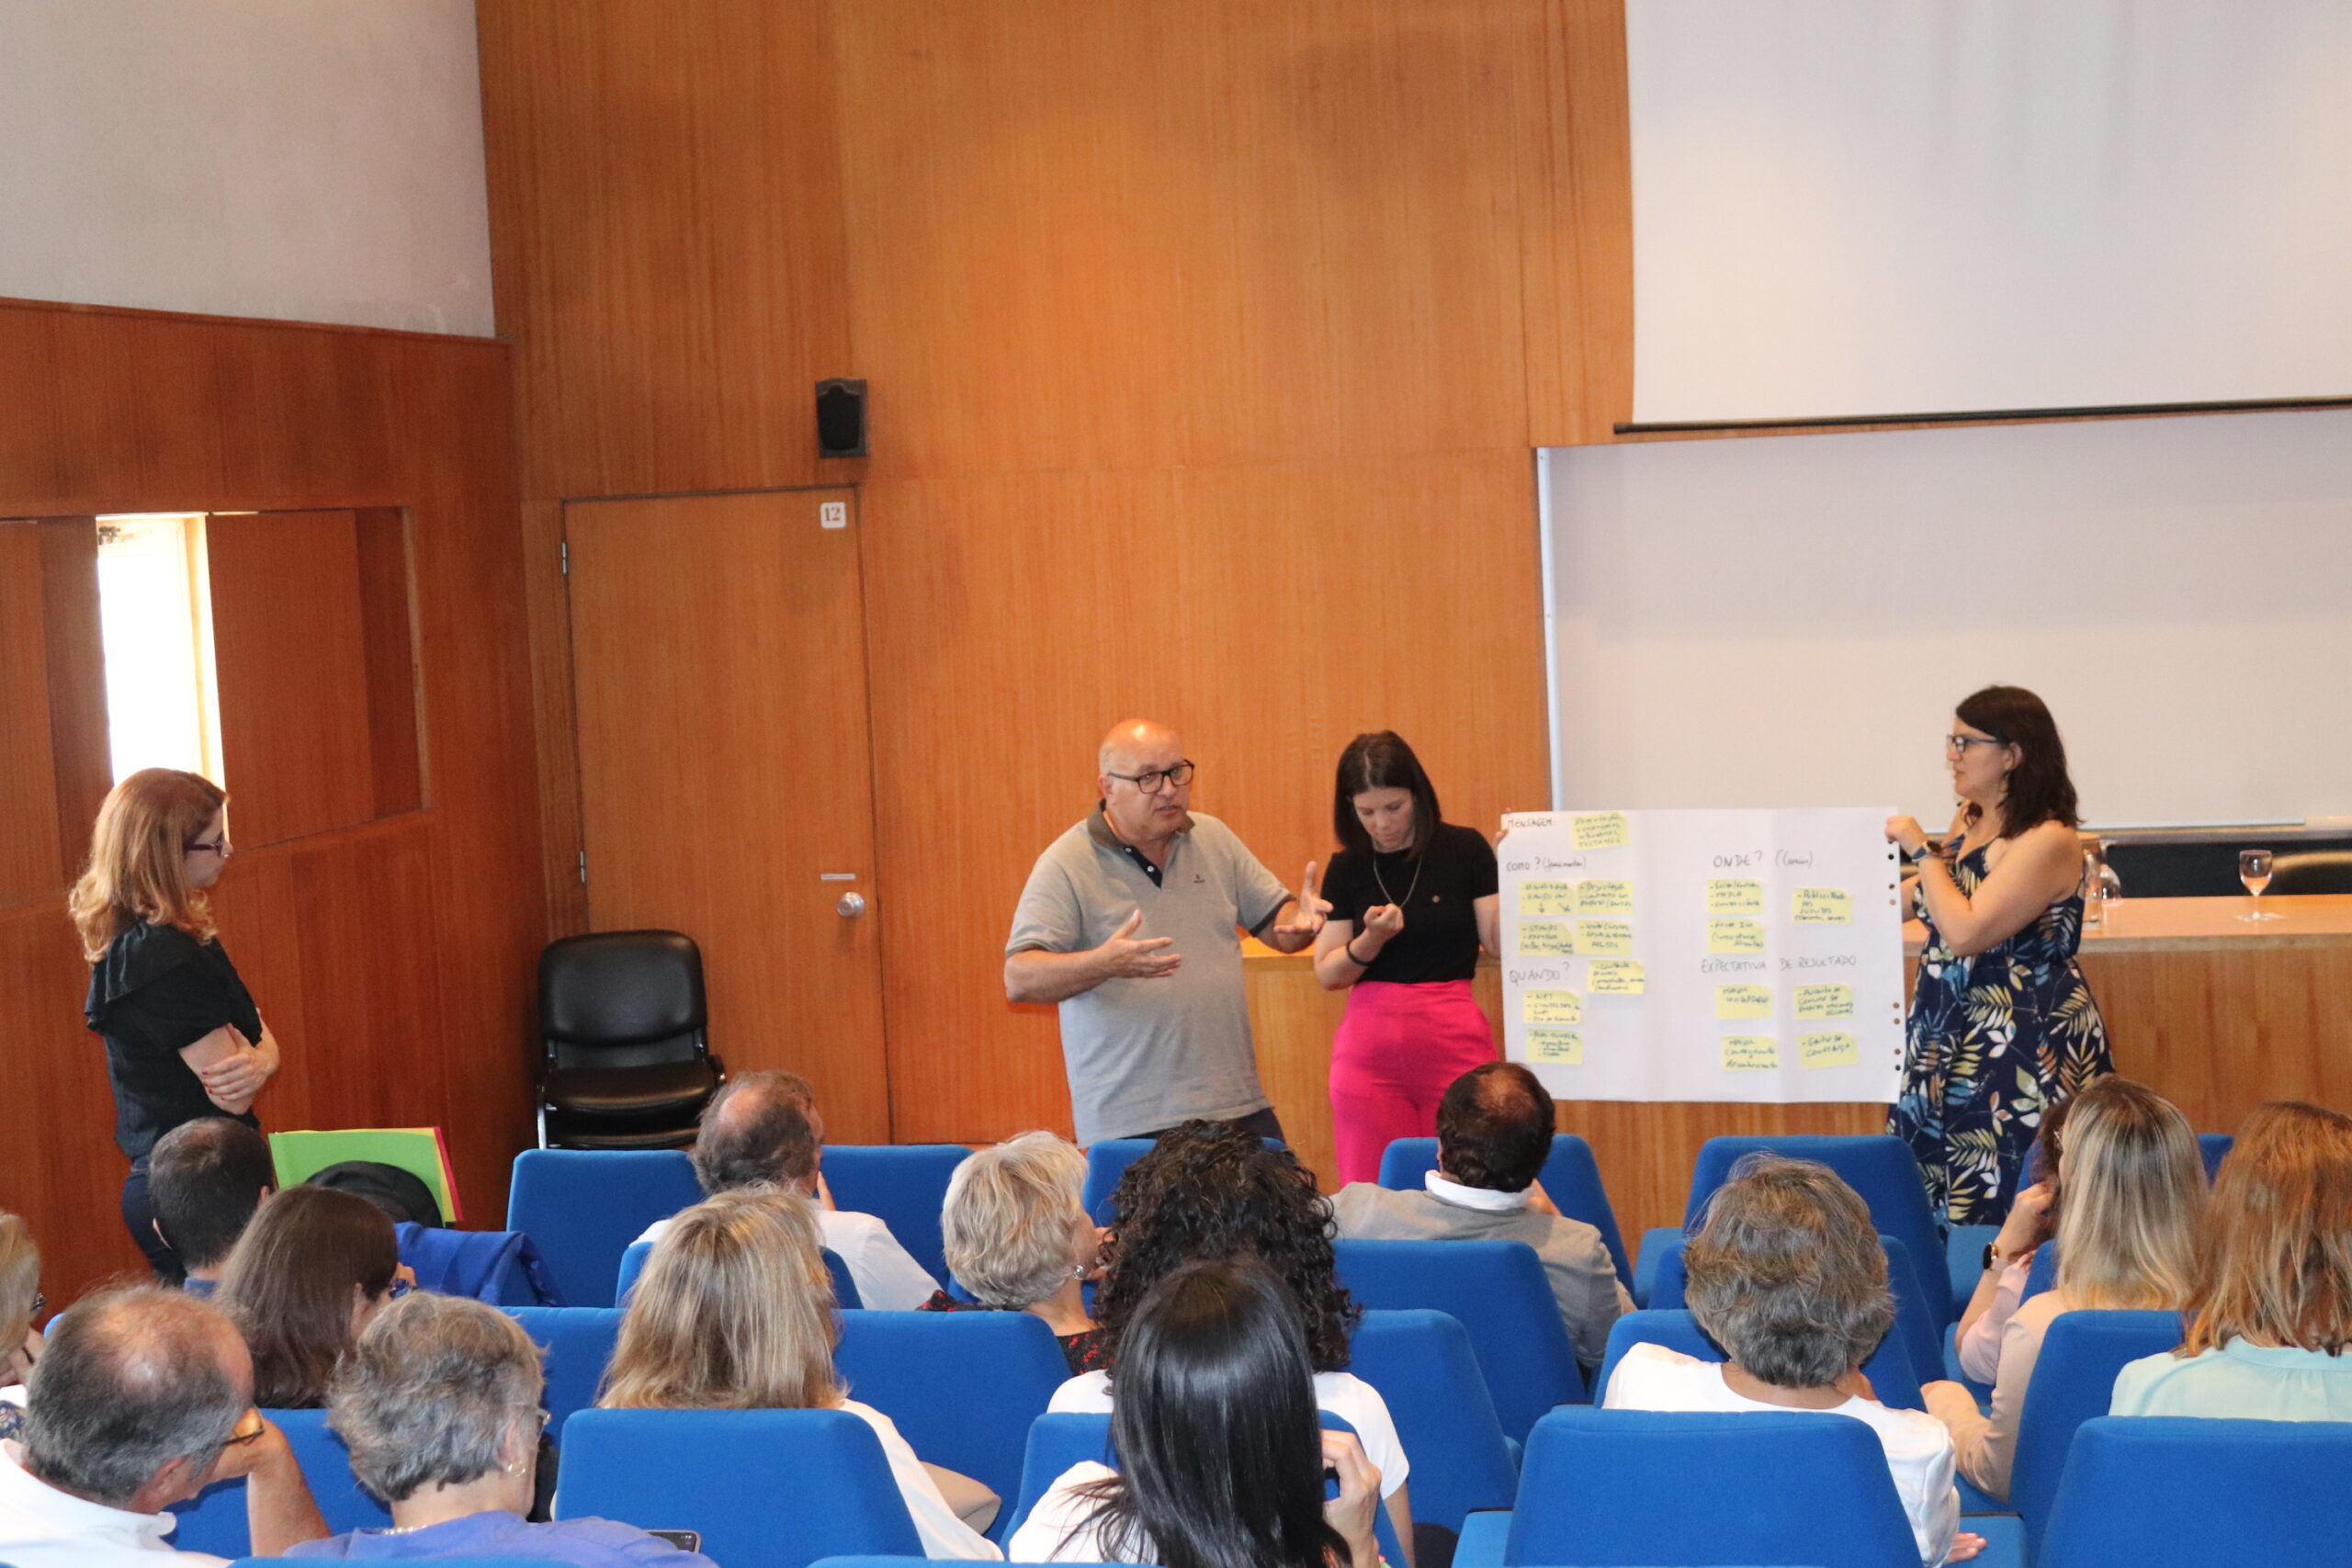 INIAV researcher José Matos presents the work of his group in the practical exercise "What do we want to make visible? He is standing in front of the audience in the auditorium. The workshop facilitators, Rita Neves and Ana Santos-Carvalho, hold an A0 sheet of paper supporting the presentation.